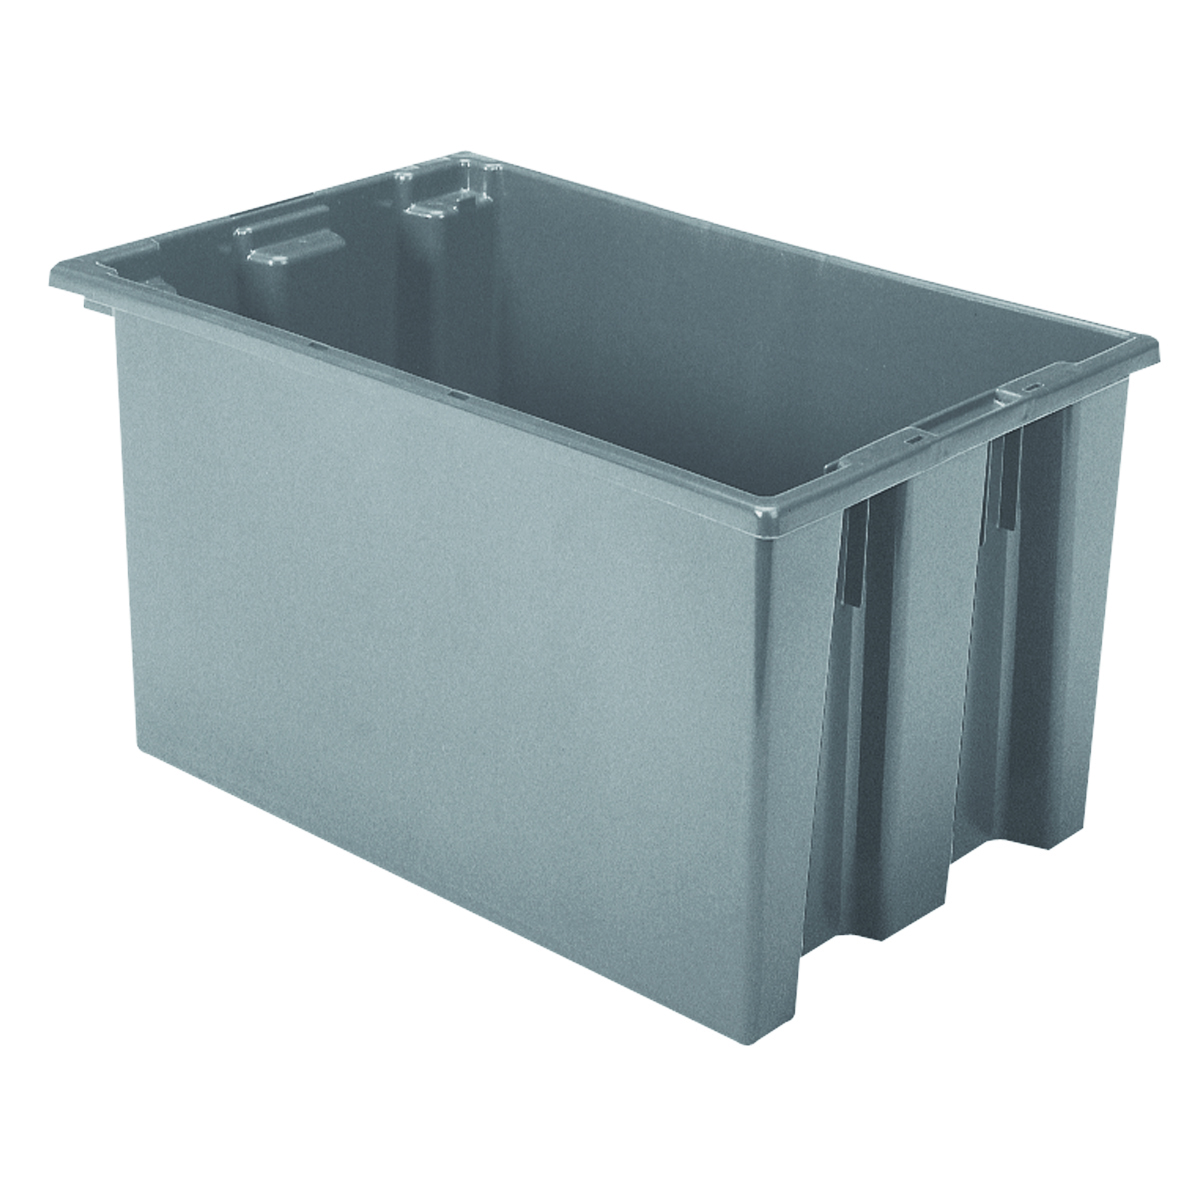 Grey Plastic Nest and Stack Tote Lid - 25 1/4L x 16 1/4W